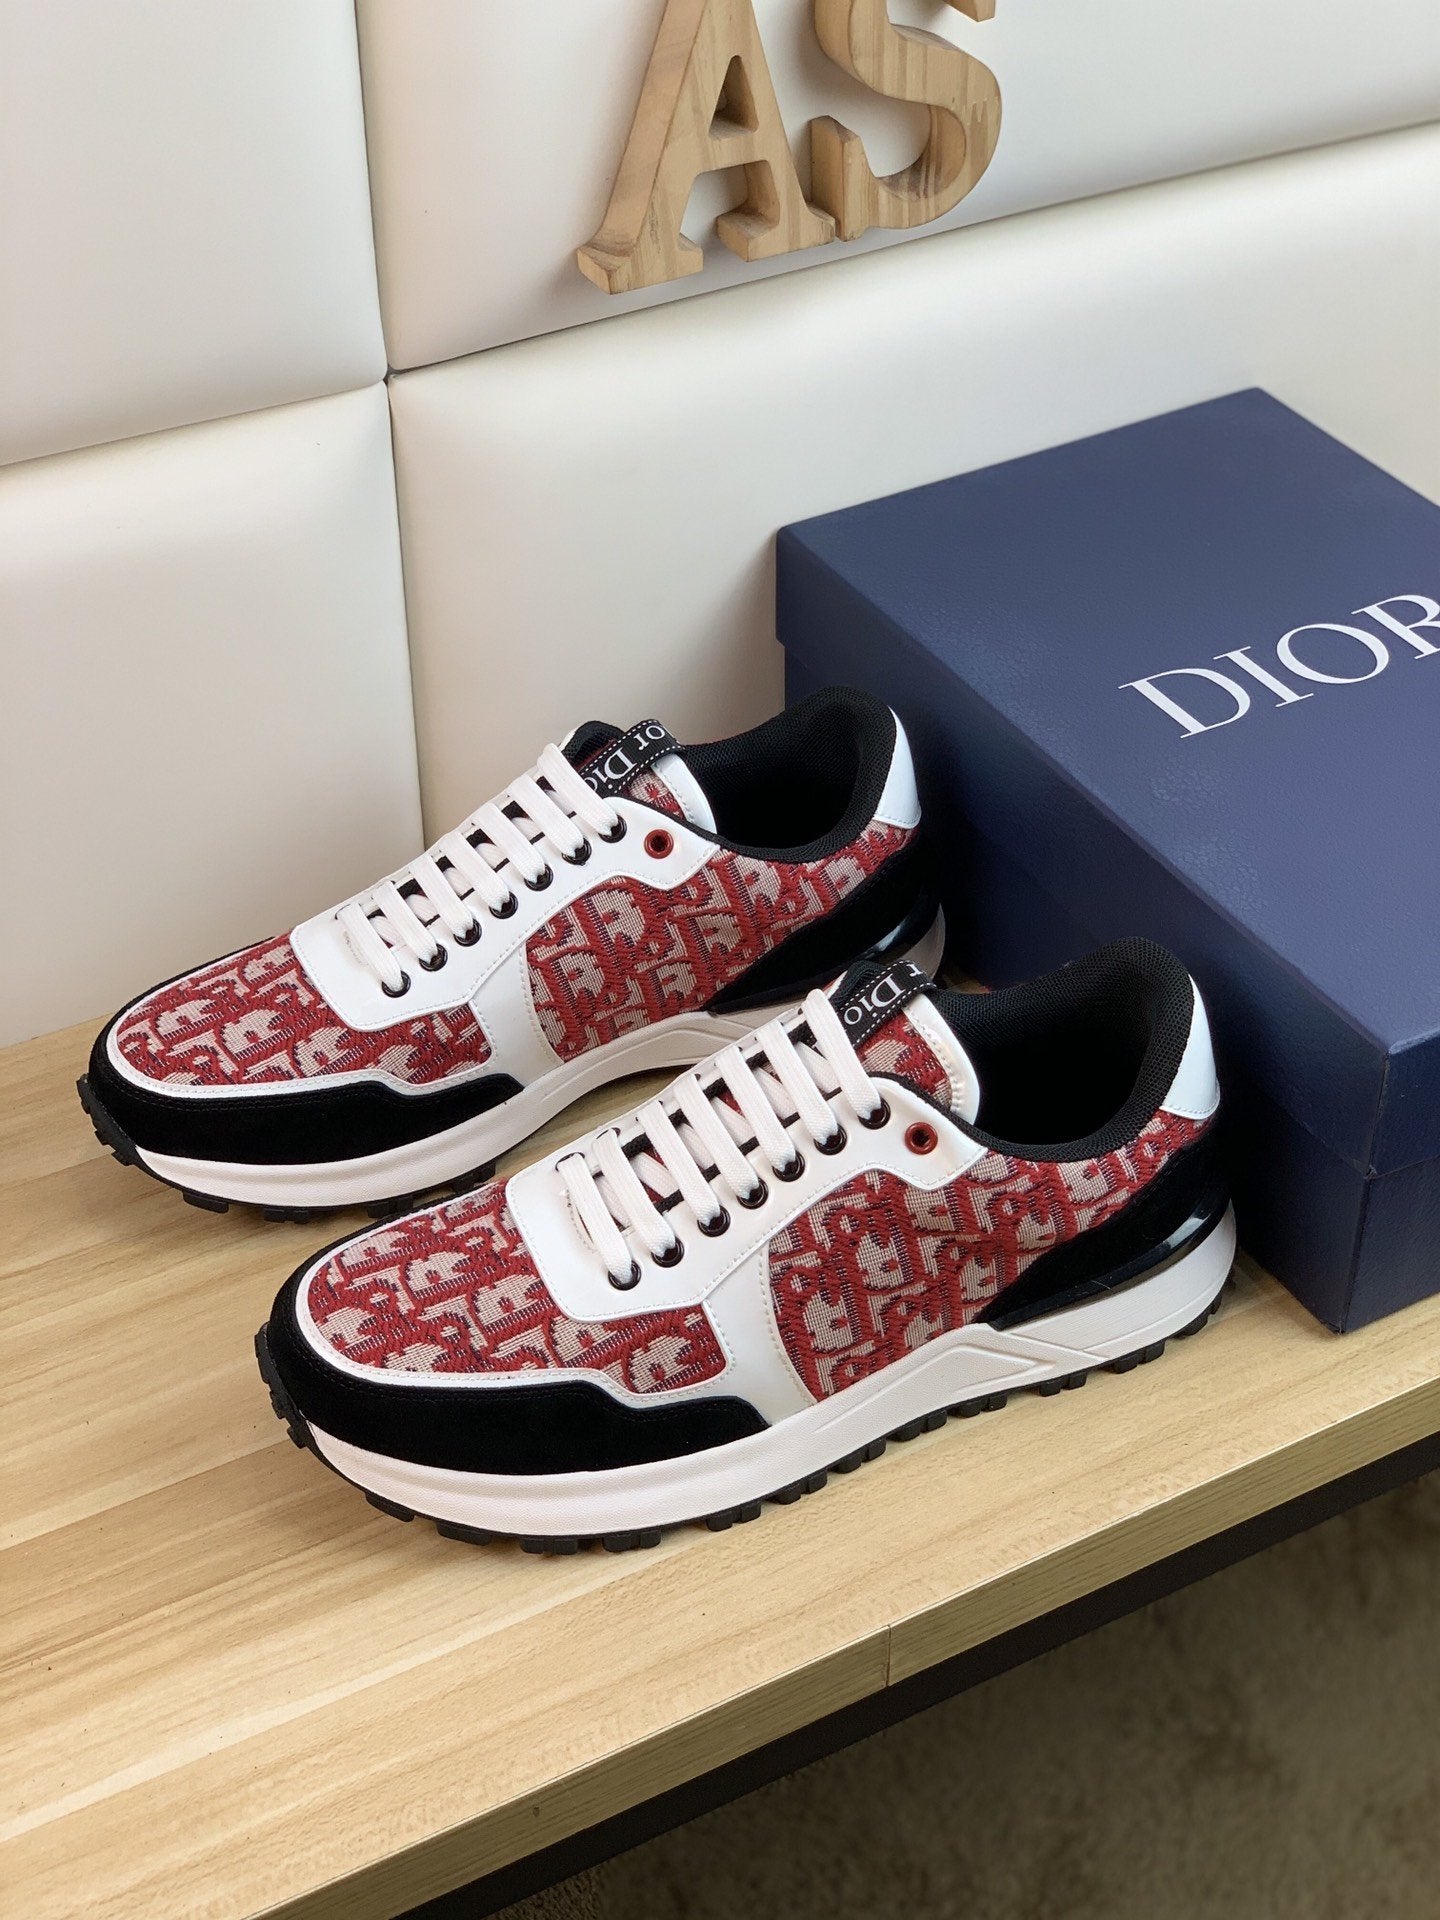 Dior Men's 2023 NEW ARRIVALS Low Top Sneakers Shoes from sho